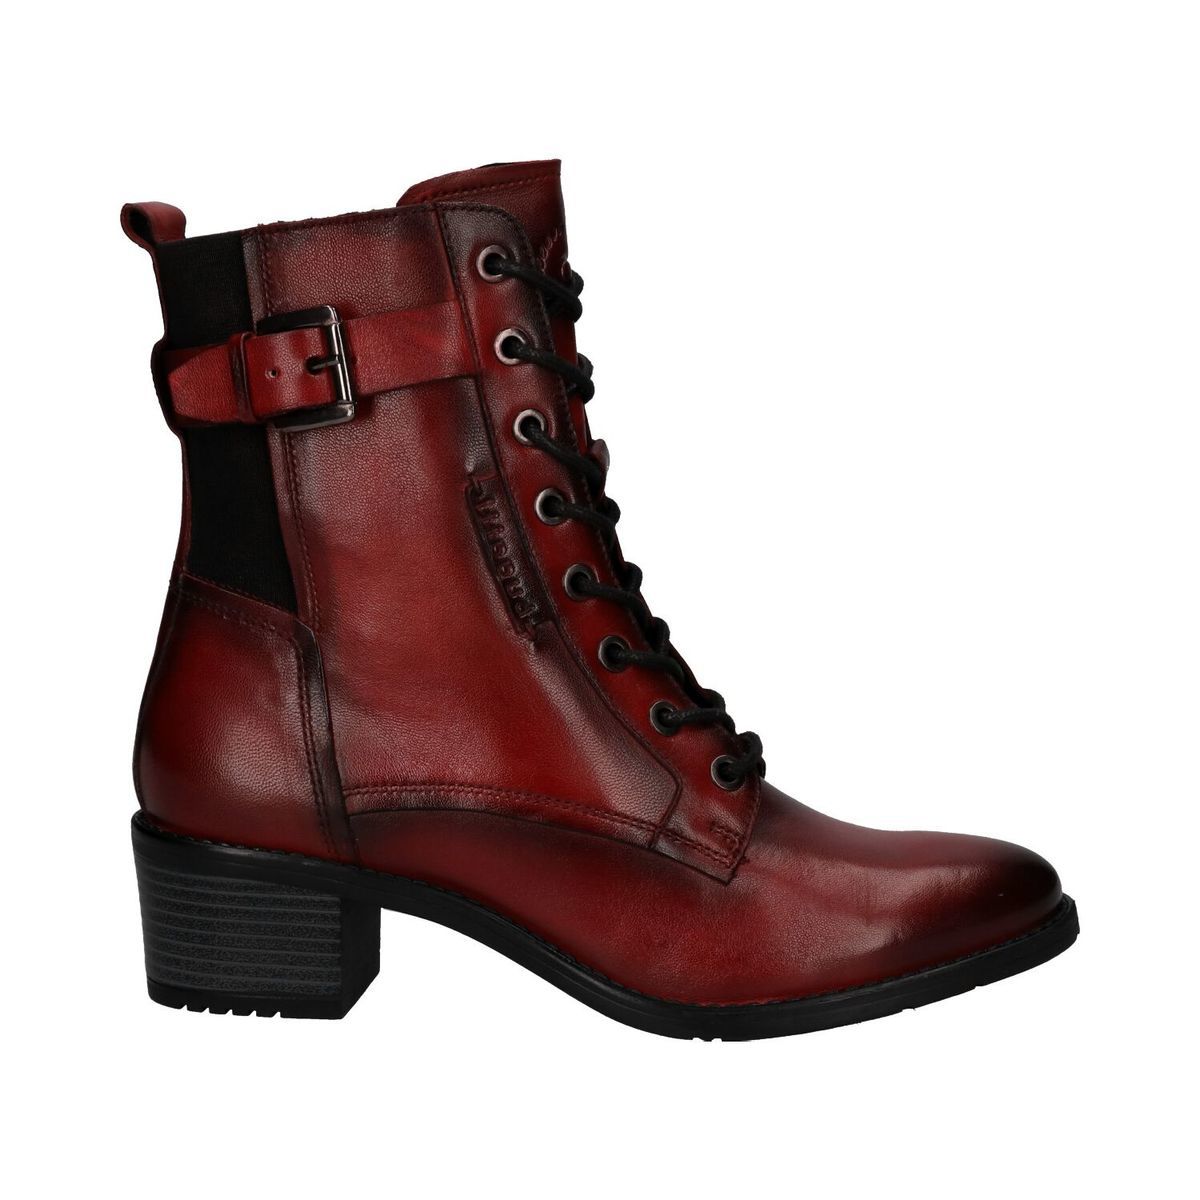 Bugatti Ruby  Lace Zip Red leather Womens Lace Up Boots 4115623L-3000 in a Plain Leather in Size 36